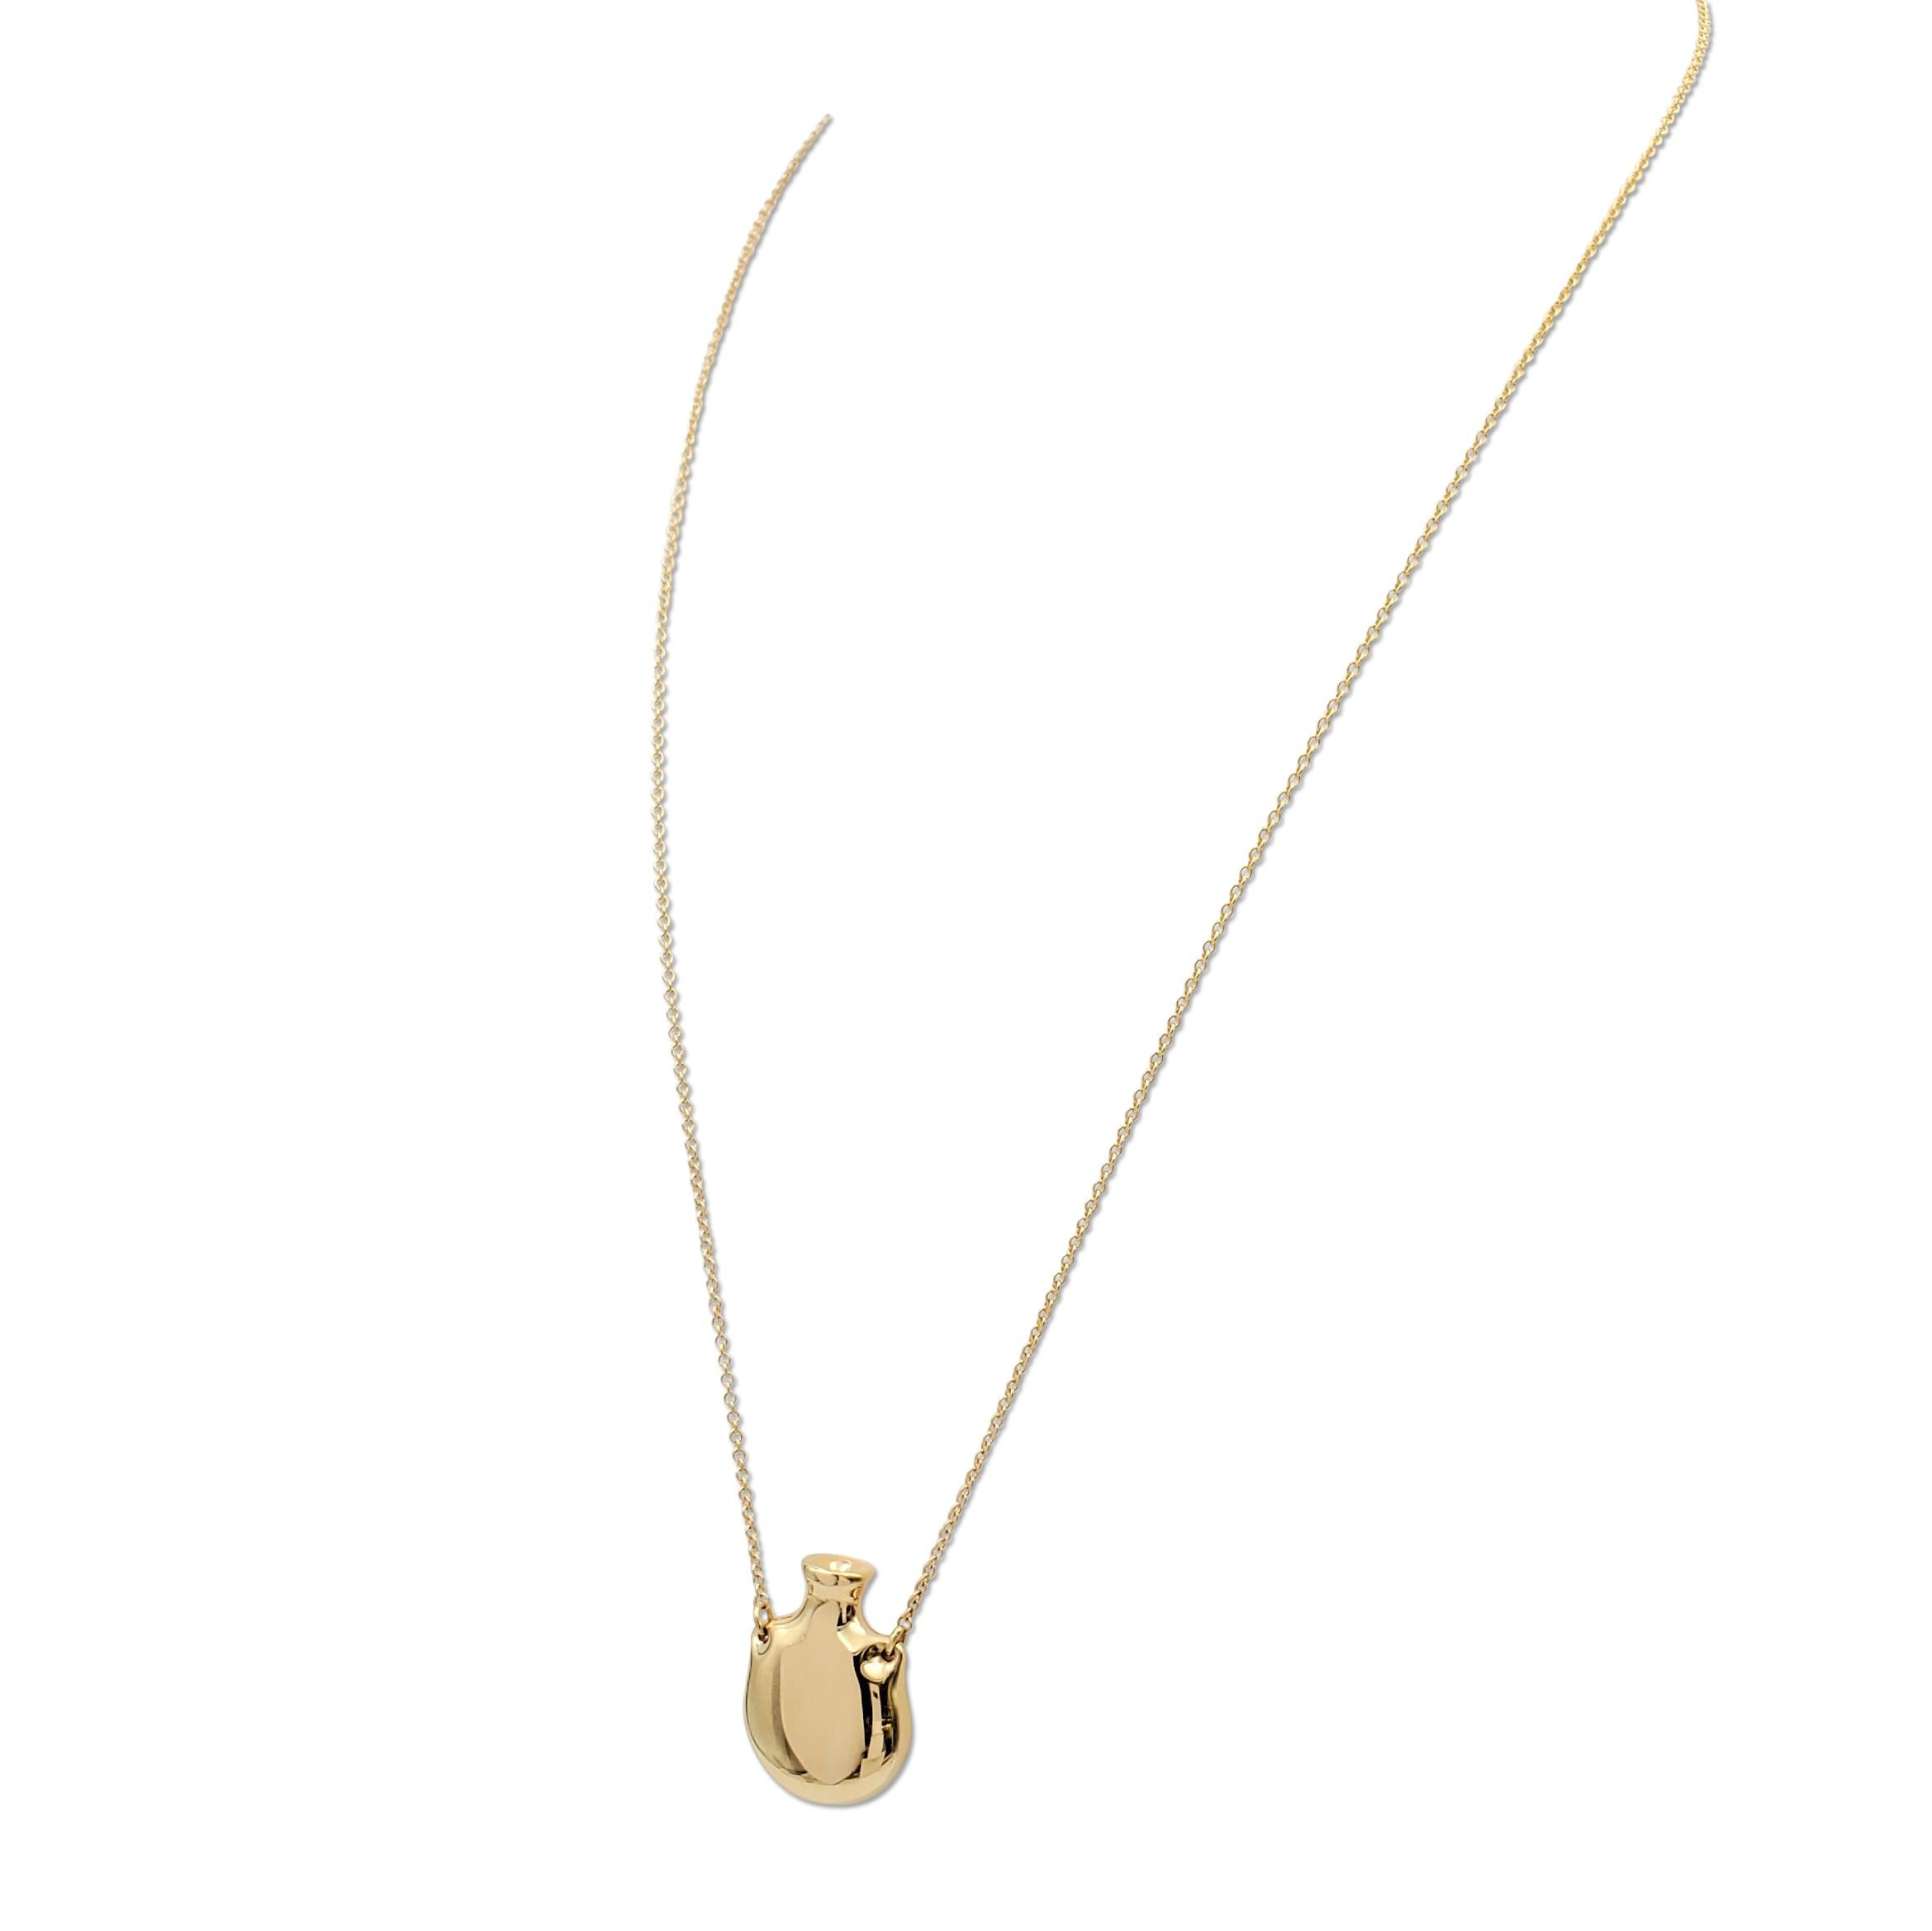 Authentic Elsa Peretti for Tiffany & Co. open bottle necklace crafted in 18 karat yellow gold. Signed Tiffany & Co., Elsa Peretti, 750 Spain. The necklace chain measures 24 inches in length. The pendant measures 29 x 22 mm. The bottle is open and